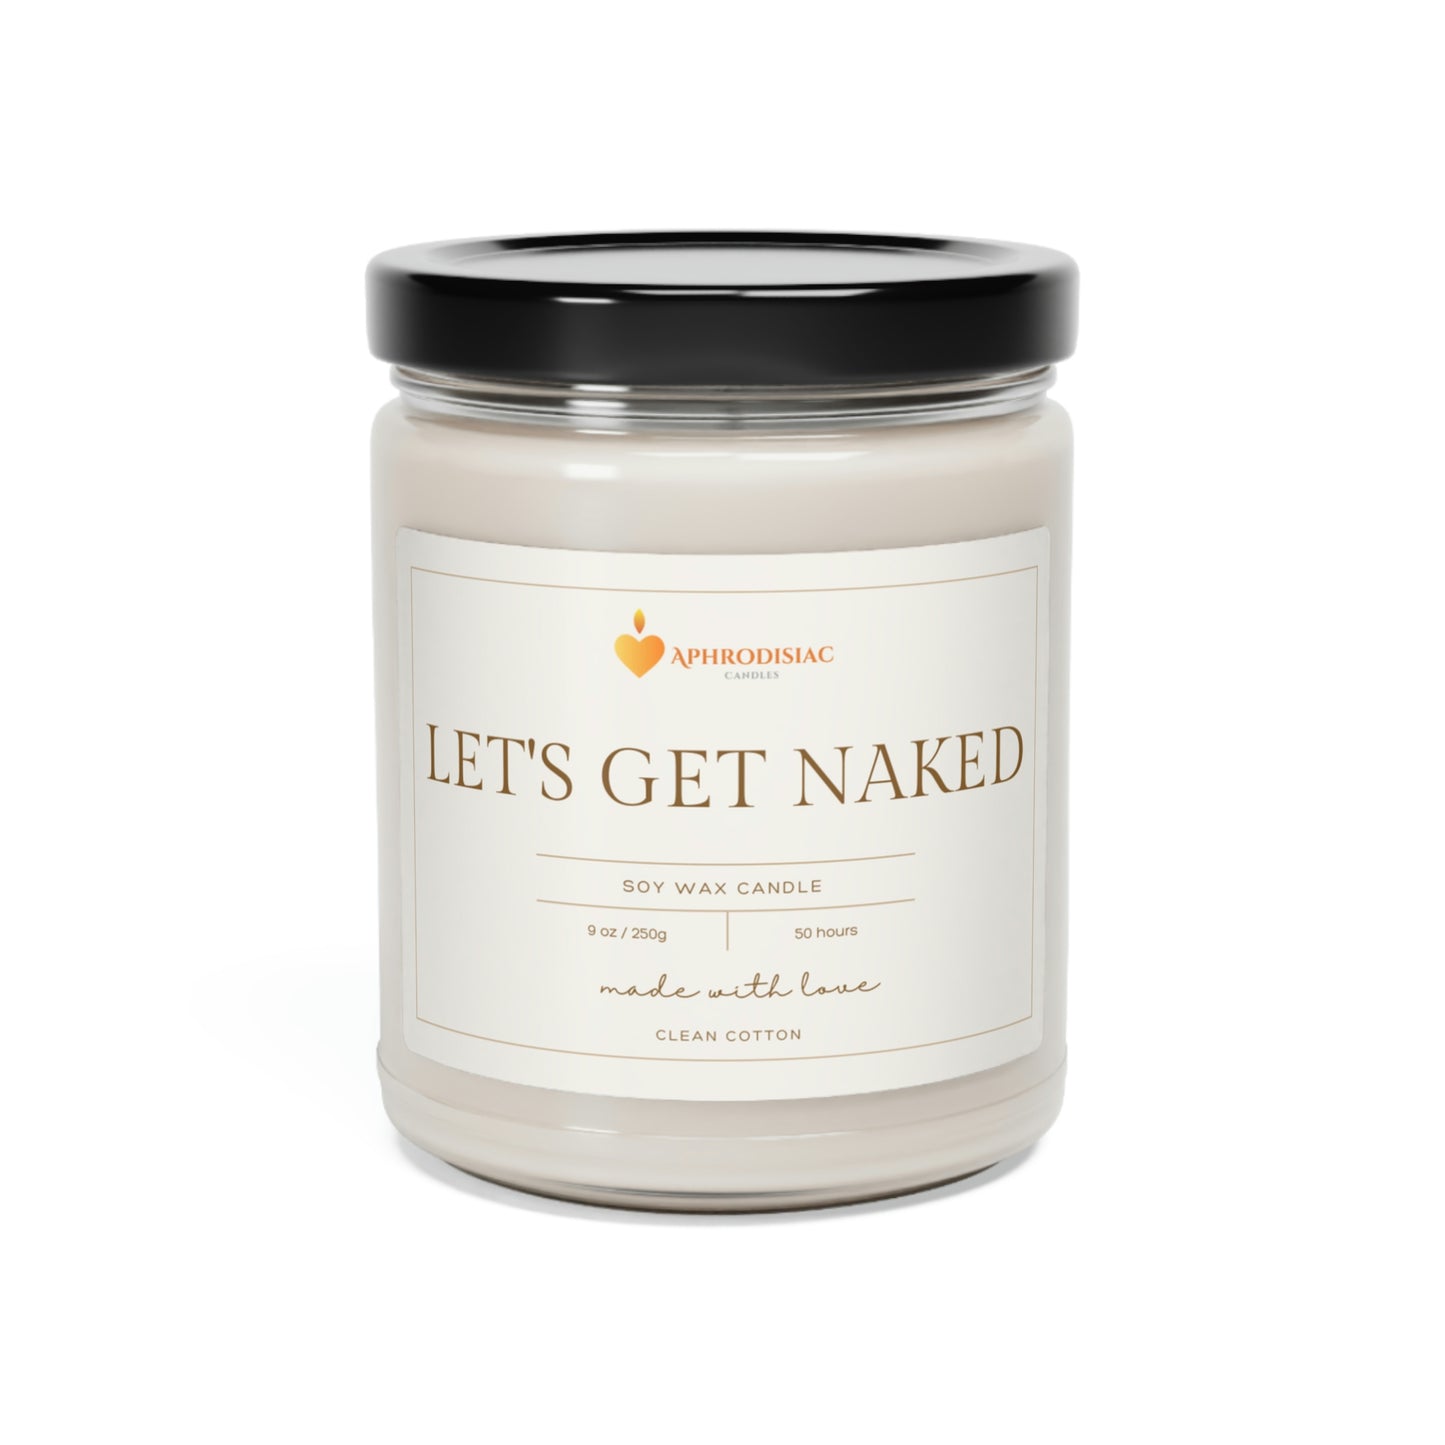 Let's Get Naked Aphrodisiac Soy Candle, 9oz